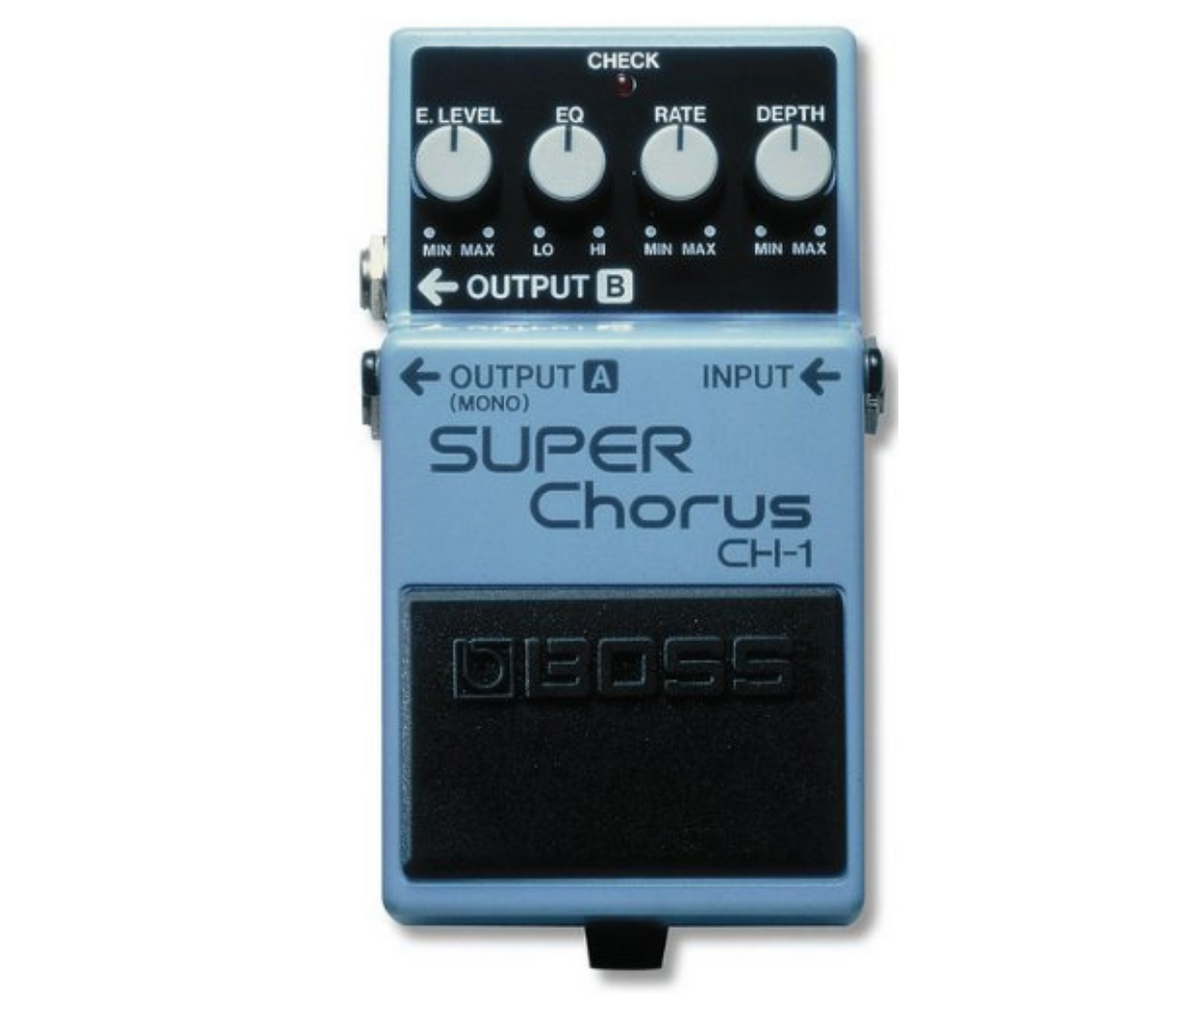 BOSS CH-1 Super Chorus Best Guitar Effects Pedal for Clean Classic Chorus Effect with Mono Input and Stereo Output